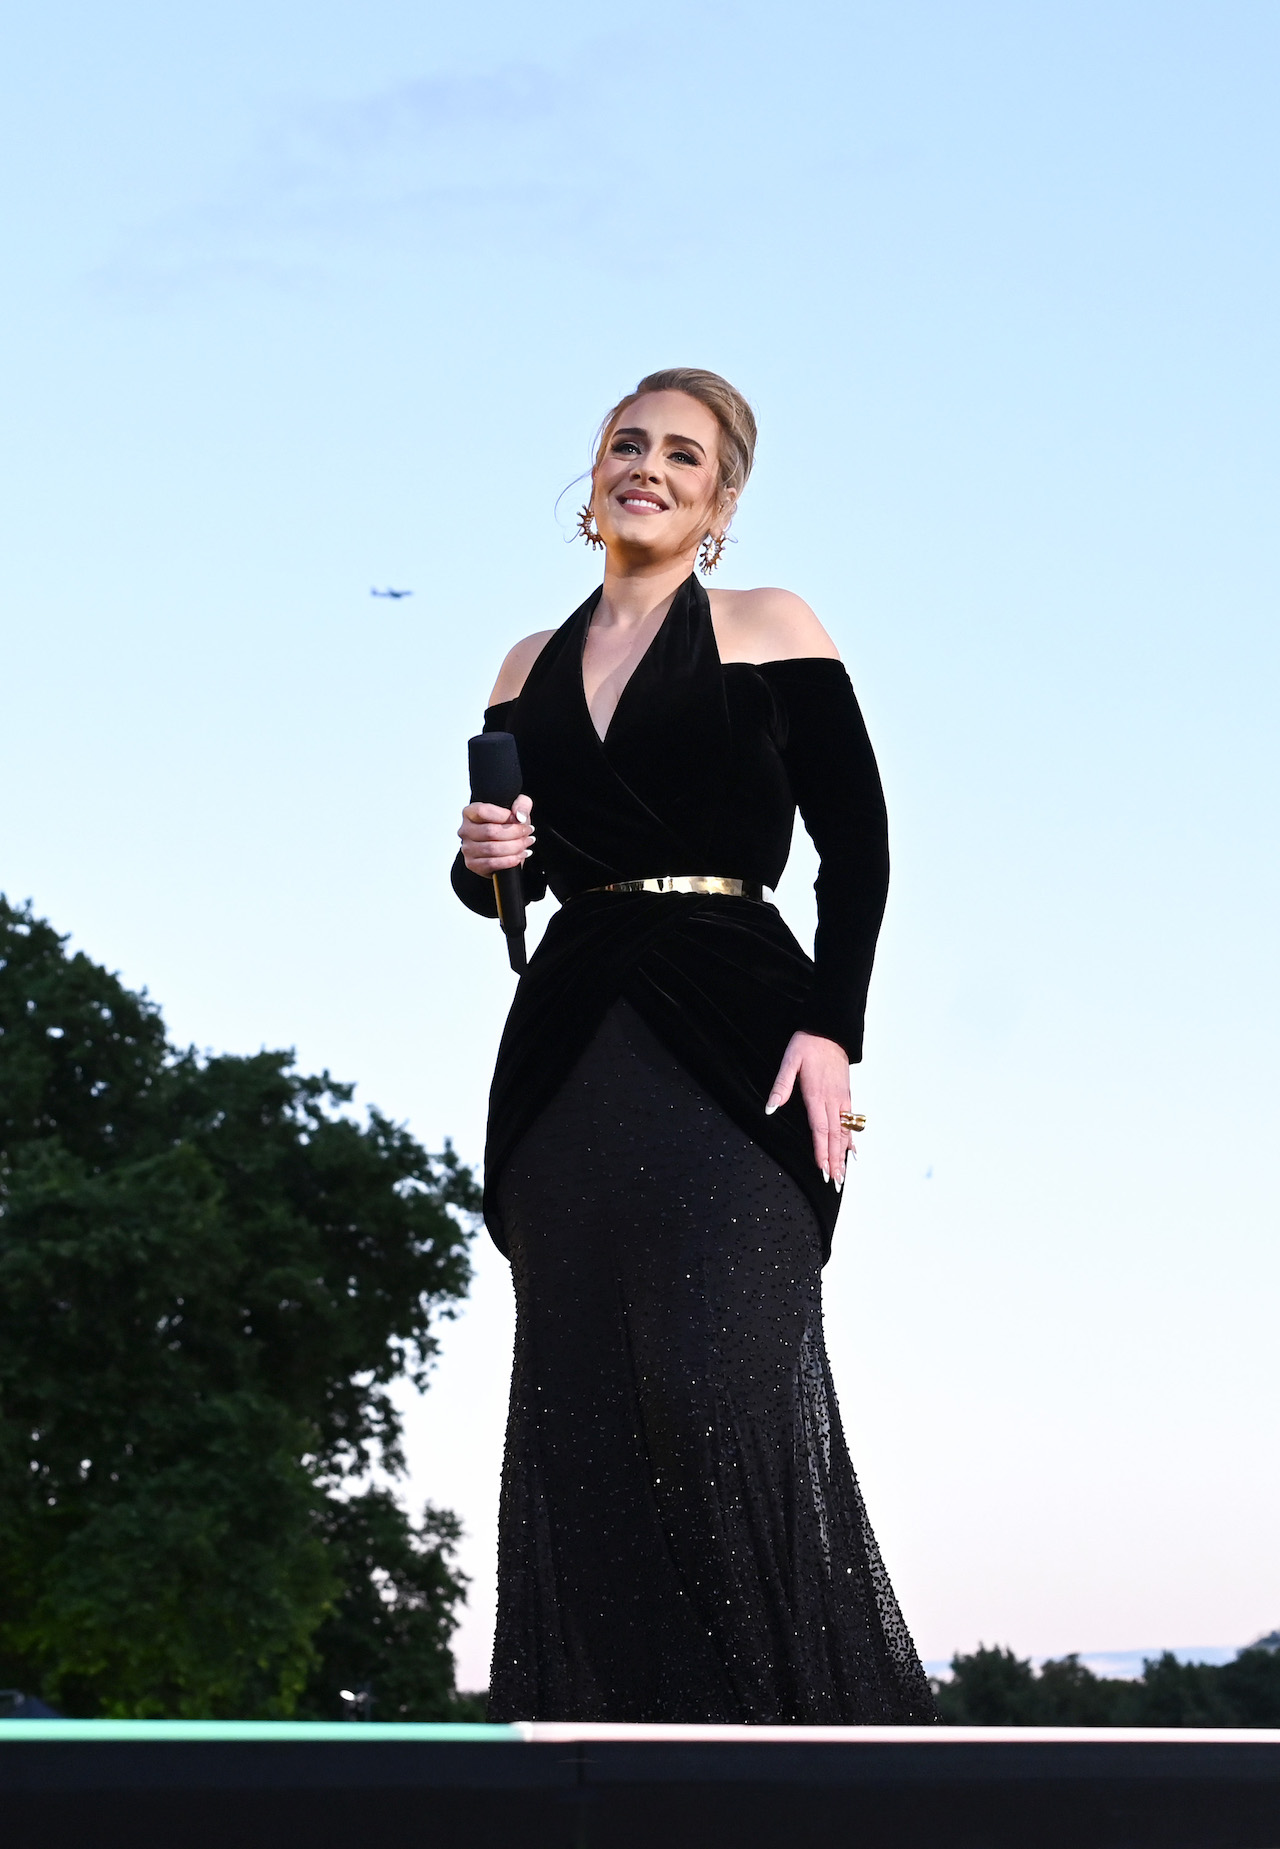 Adele Sports Glamorous Black Dress For First Concert In Five Years